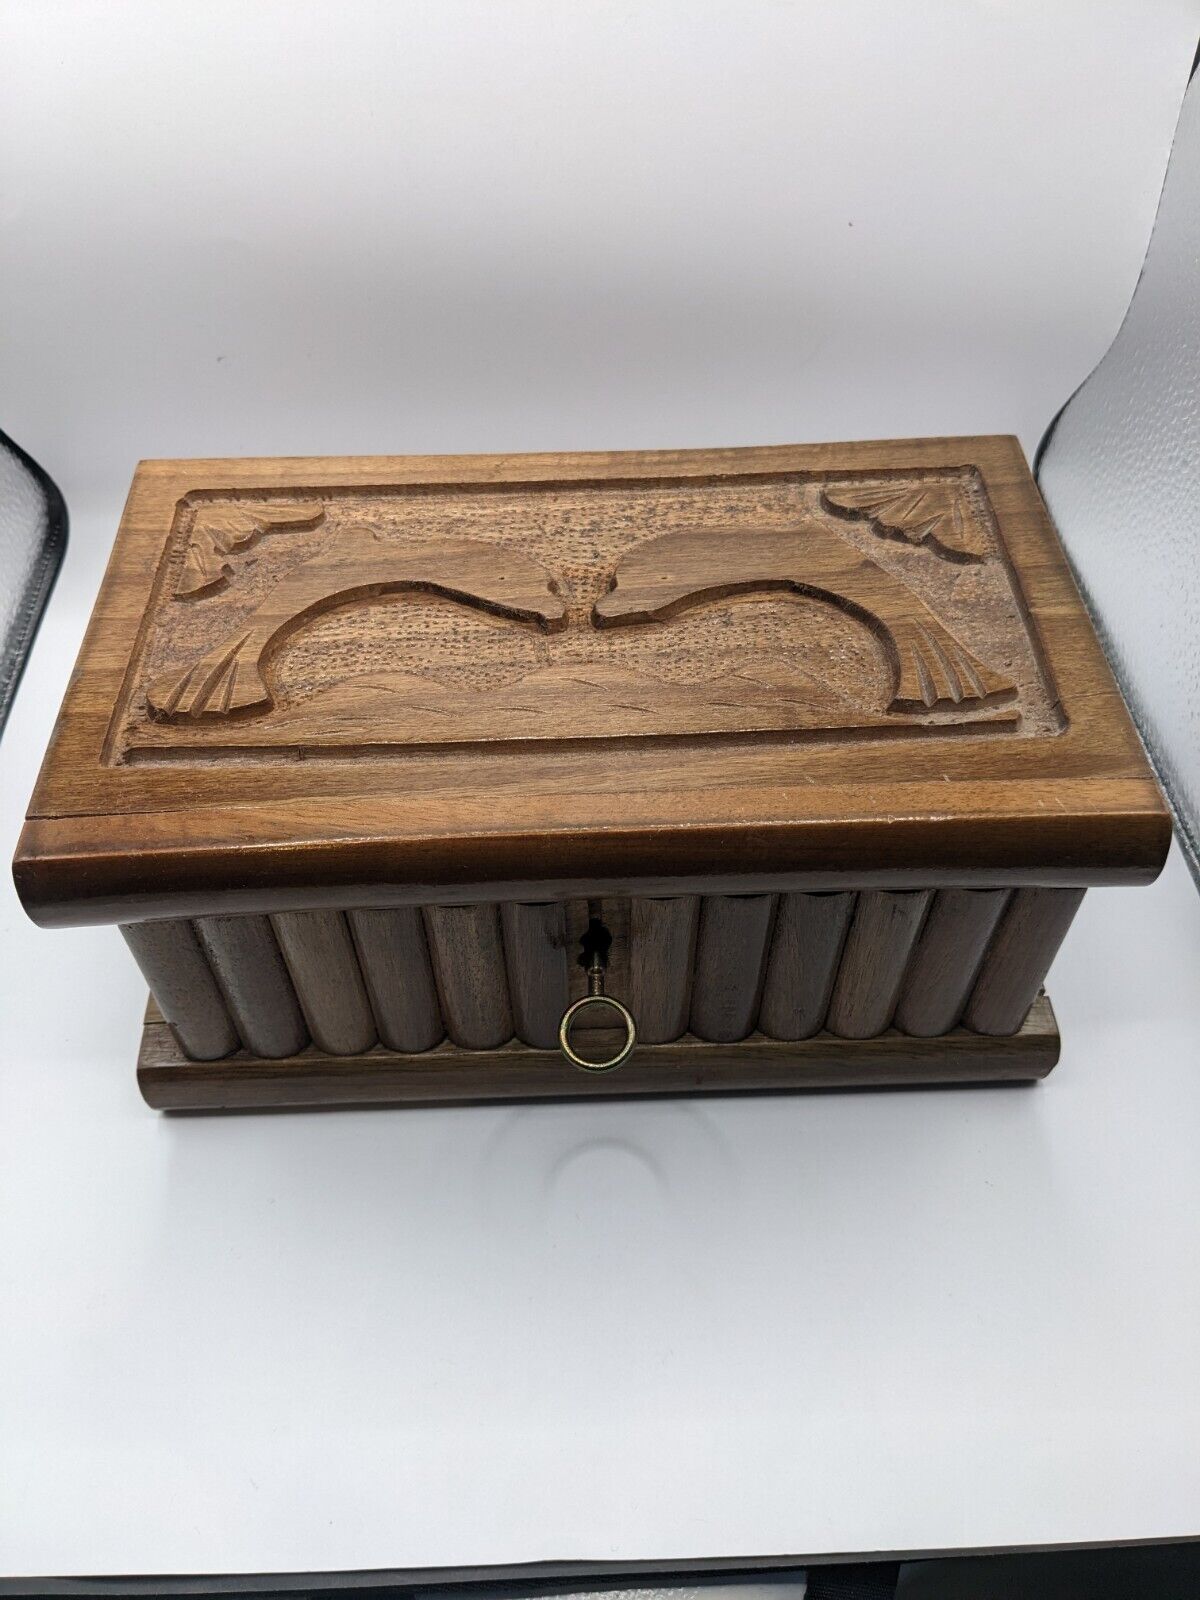 Vintage Handmade Carved Wooden Box With Key lock Dolphin Design 9.5x4.5\